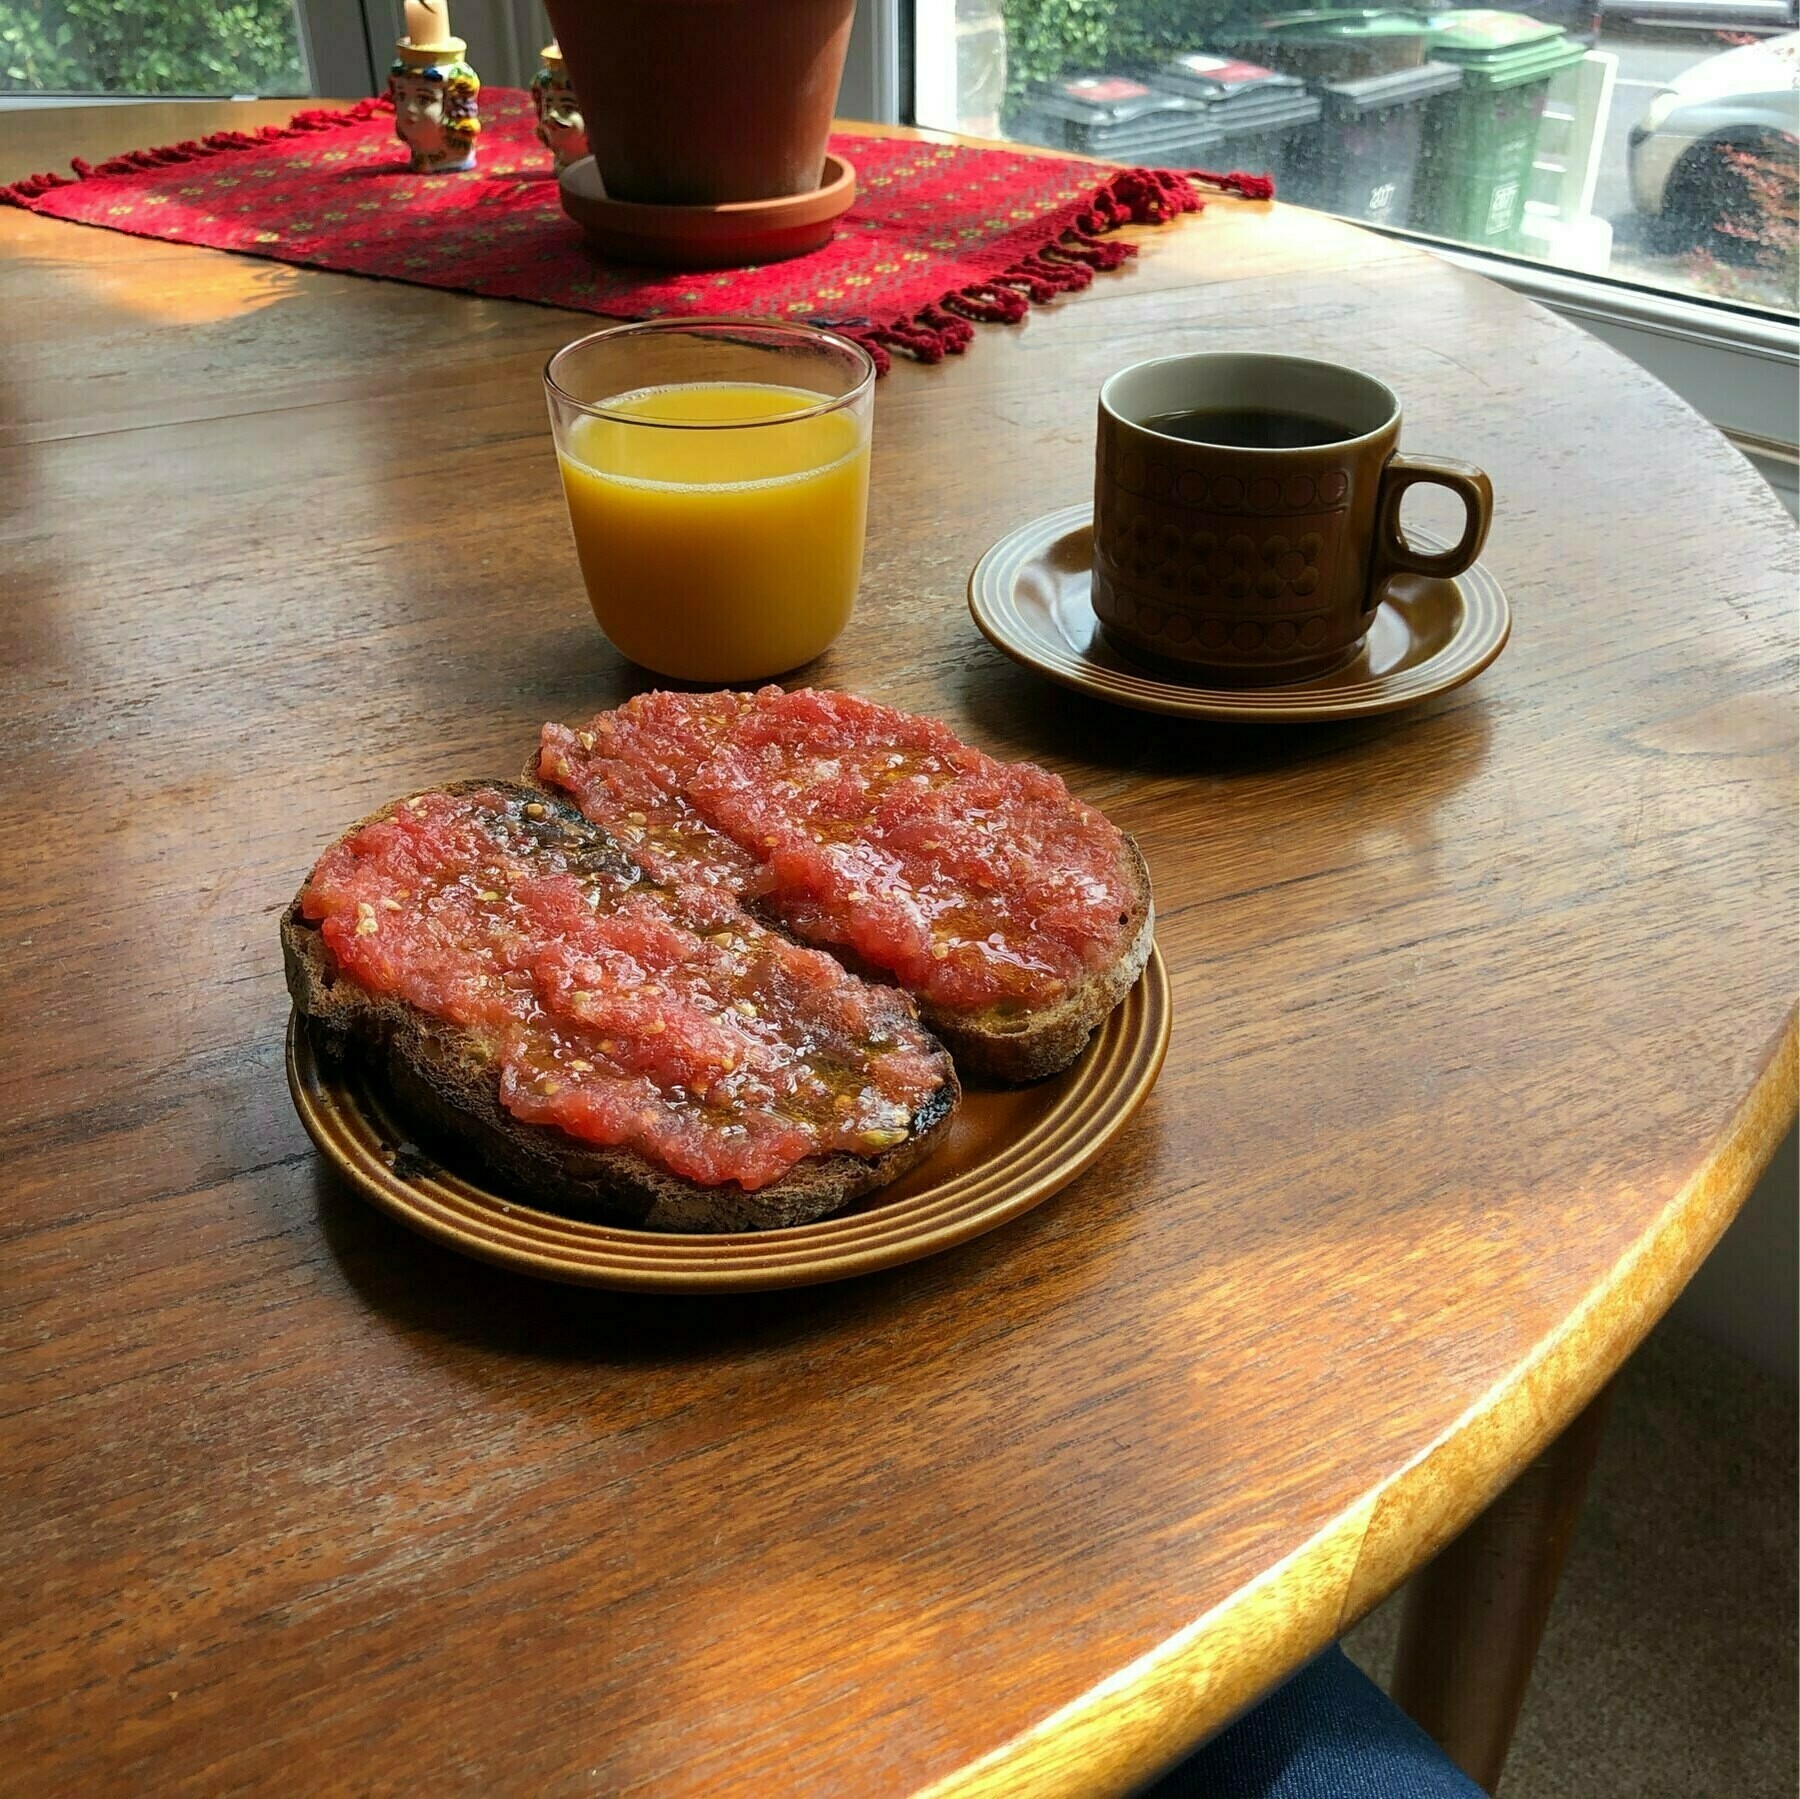 Toast with tomato, coffee and orange juice on a brown wood table